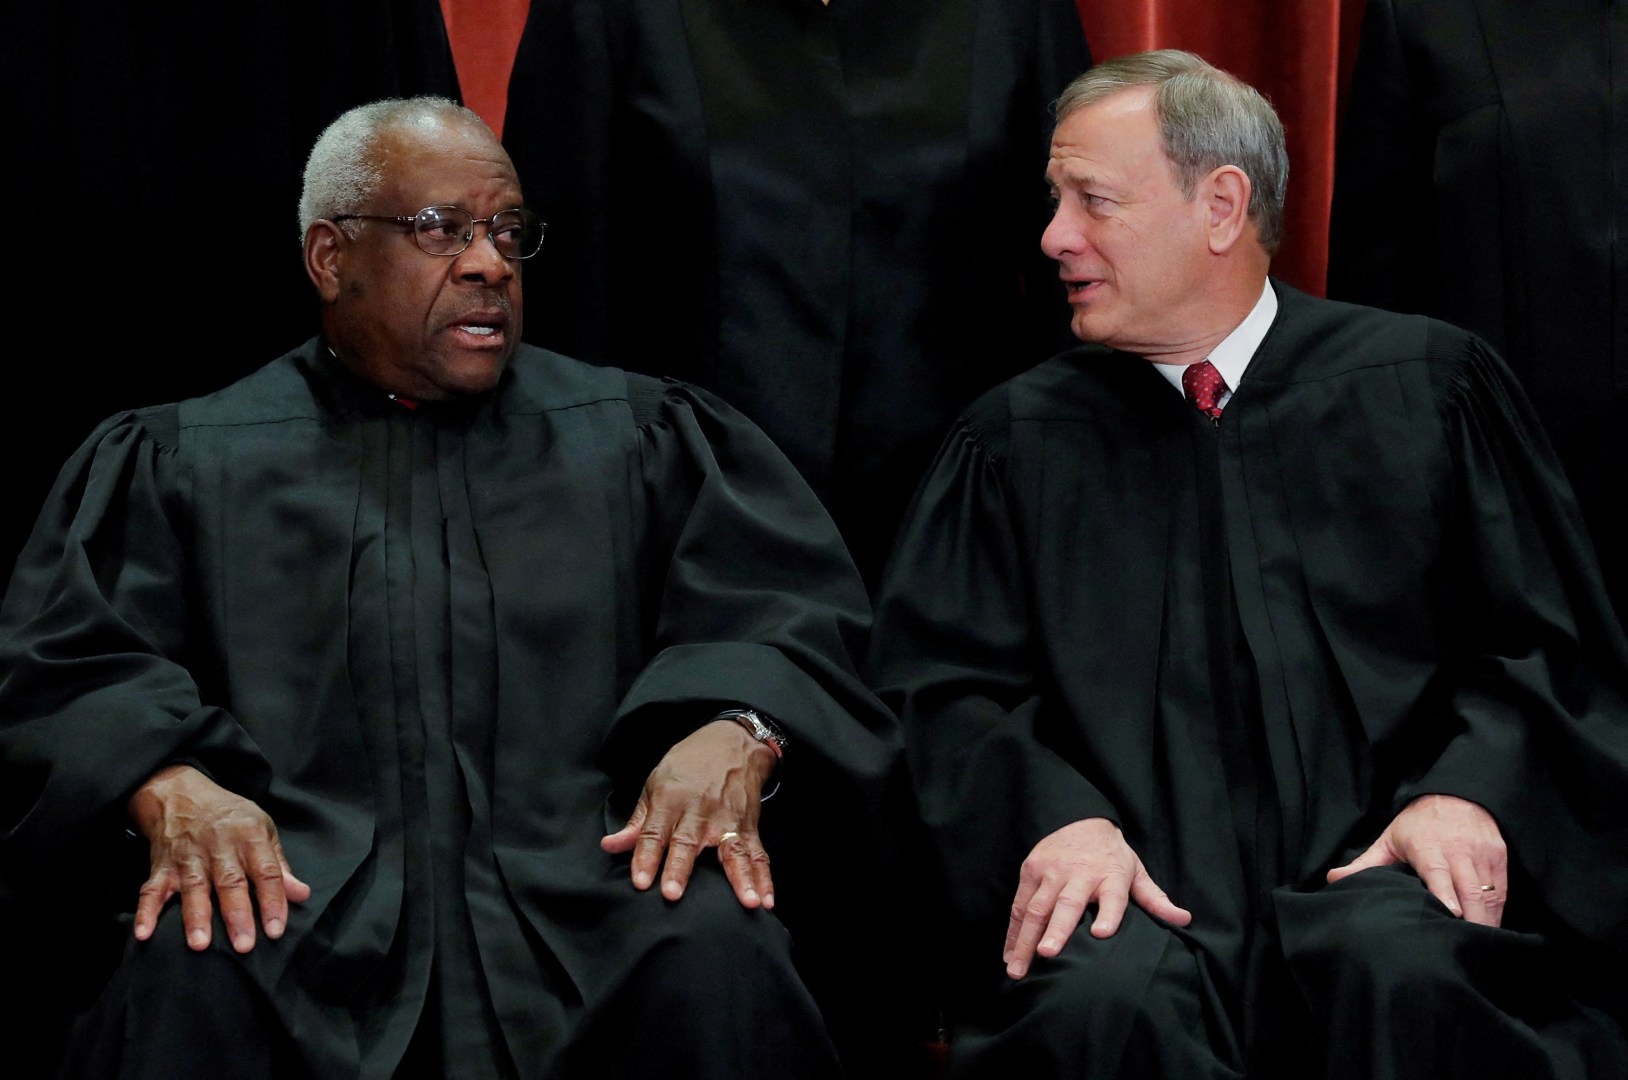 The Left's attacks on Clarence Thomas are an attempt to weaken the Supreme Court in light of its conservative rulings like overturning Roe.